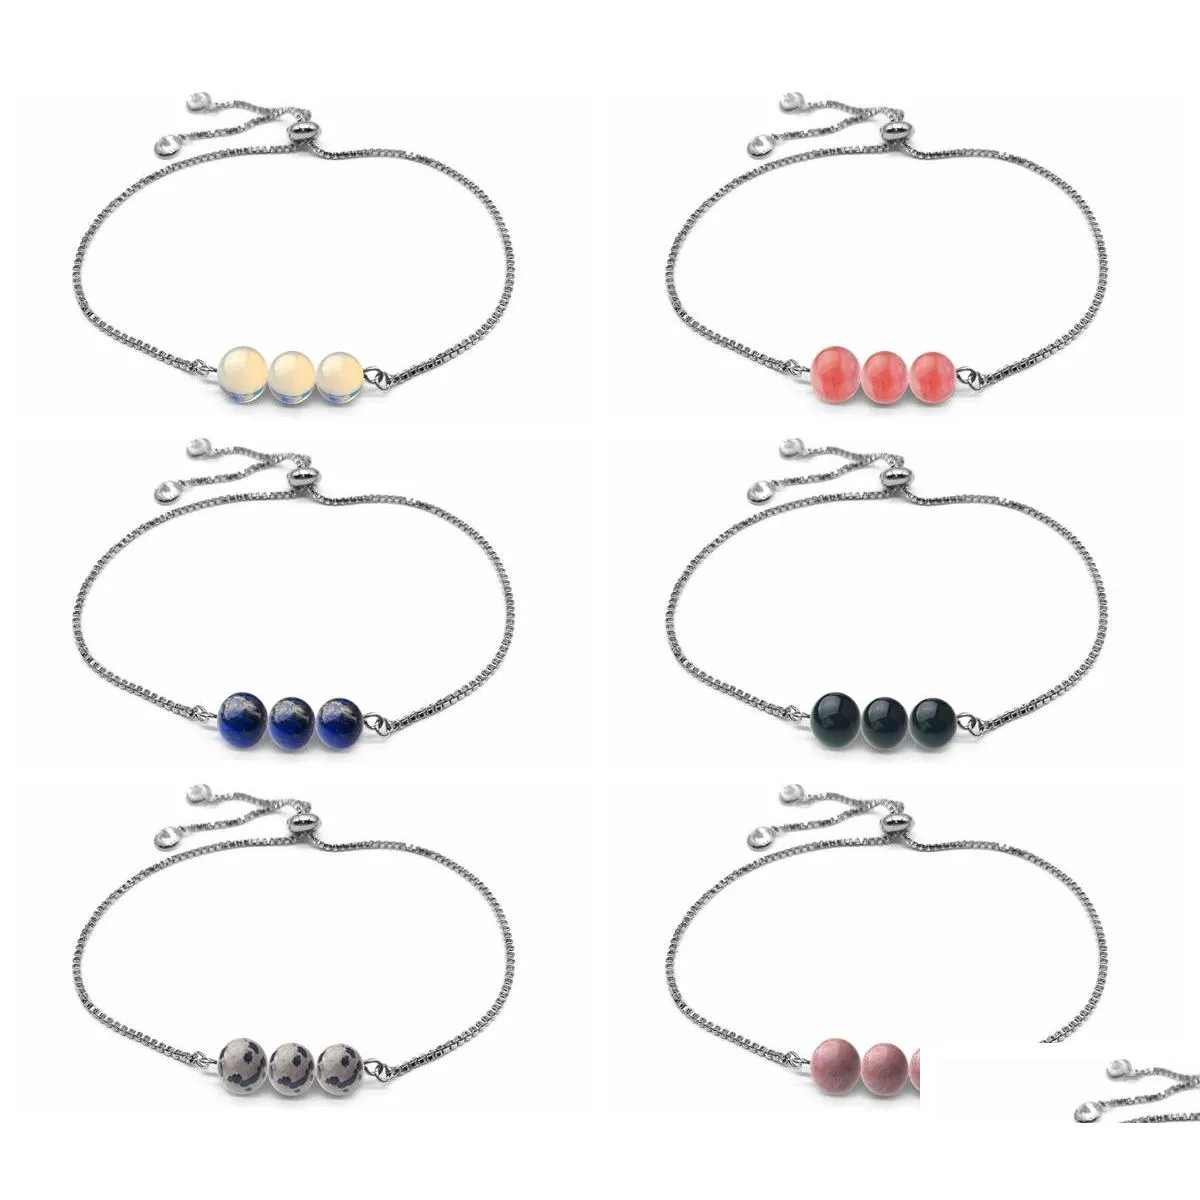 silver chain healing crystal beaded bracelet wristbands 3pcs 8mm stone beads chakra gemstone cuff bangle anklet jewelry adjustable for men women teen